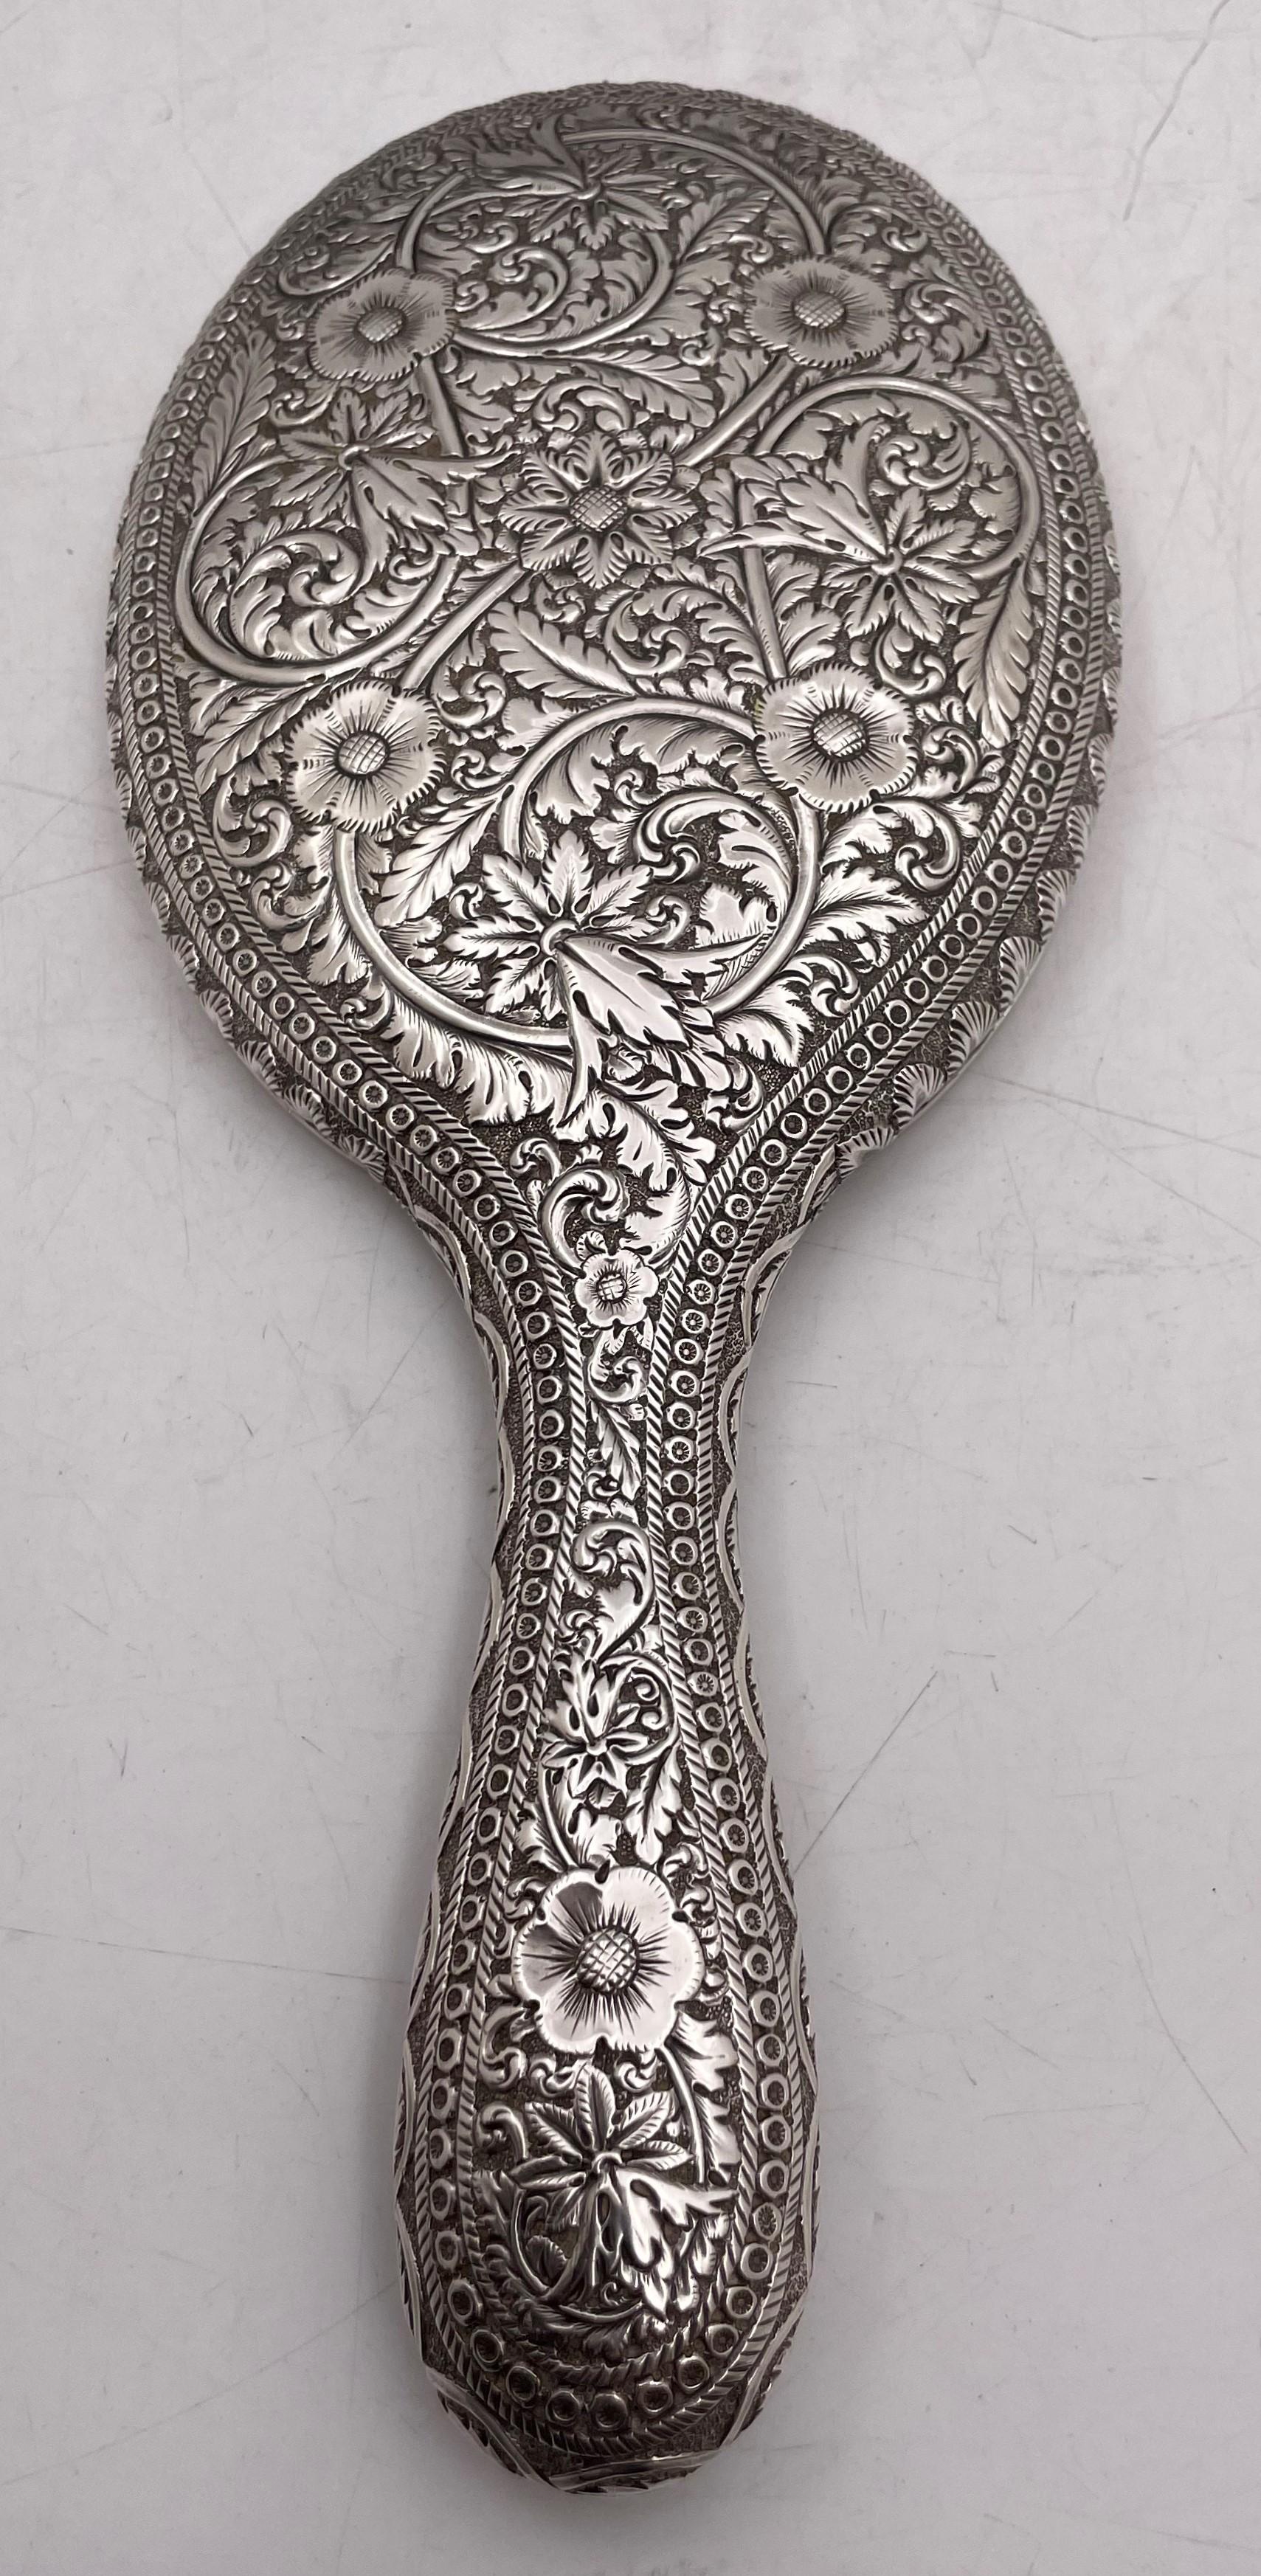 Bailey, Banks, and Biddle sterling silver and glass hand mirror from the 19th century, beautifully adorned with floral and curvilinear, geometric motifs, measuring 10 5/8'' in length by 4 1/2'' in width by 7/8'' in depth, and bearing hallmarks and a